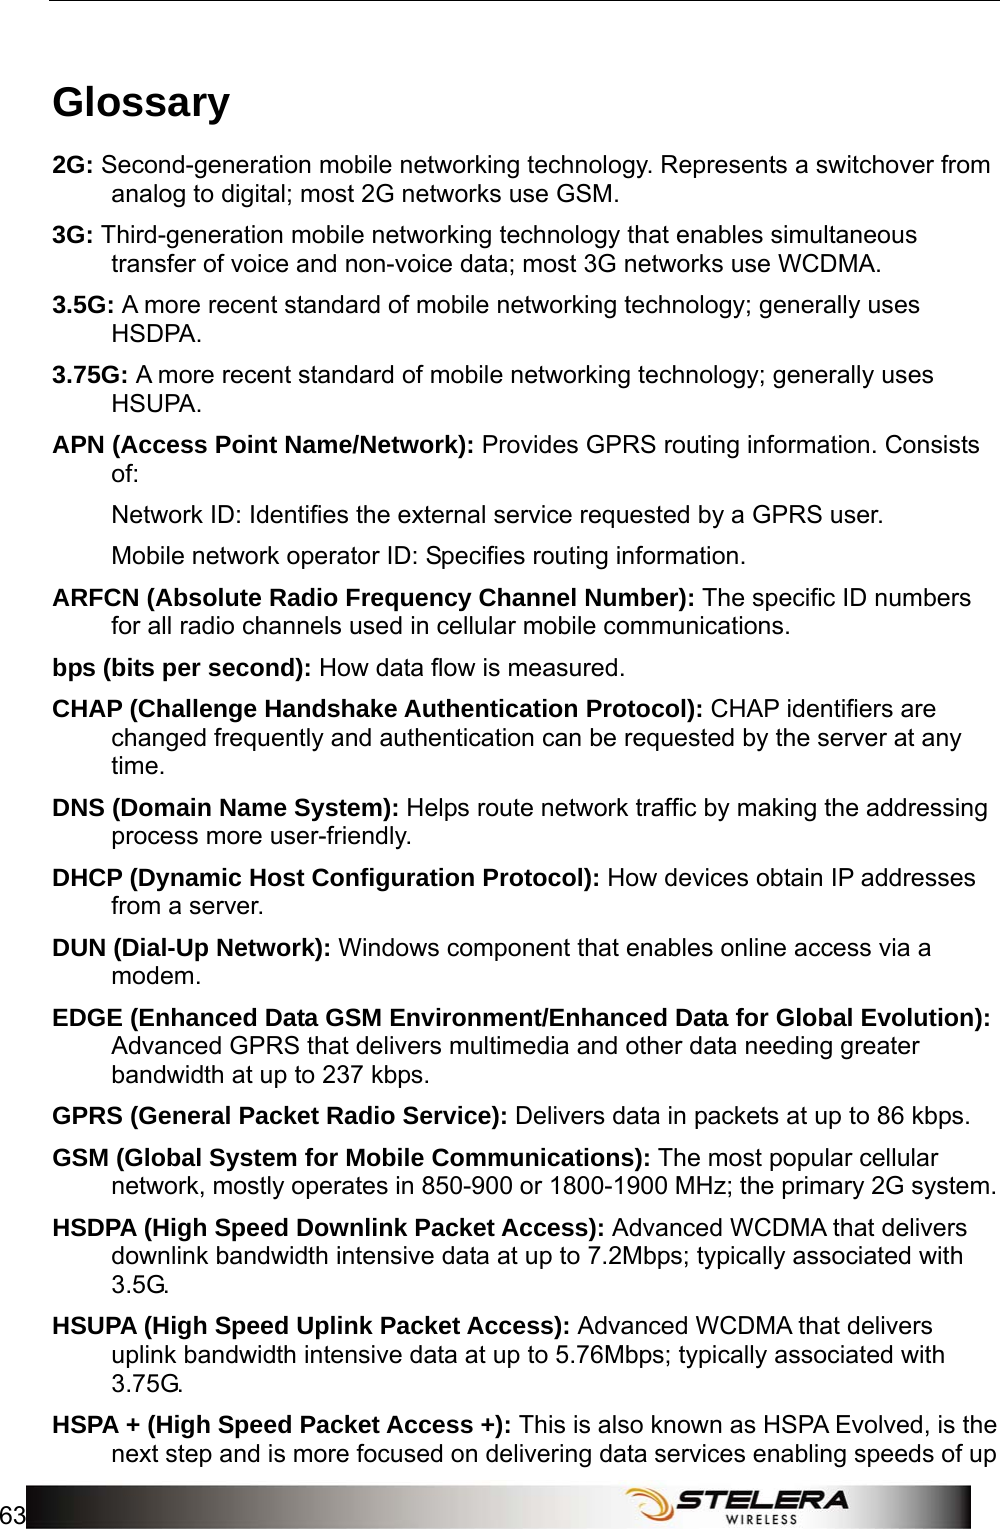   Appendix C: Important Safety Information and Glossary 63  Glossary 2G: Second-generation mobile networking technology. Represents a switchover from analog to digital; most 2G networks use GSM. 3G: Third-generation mobile networking technology that enables simultaneous transfer of voice and non-voice data; most 3G networks use WCDMA. 3.5G: A more recent standard of mobile networking technology; generally uses HSDPA. 3.75G: A more recent standard of mobile networking technology; generally uses HSUPA. APN (Access Point Name/Network): Provides GPRS routing information. Consists of: Network ID: Identiﬁes the external service requested by a GPRS user.   Mobile network operator ID: Speciﬁes routing information. ARFCN (Absolute Radio Frequency Channel Number): The speciﬁc ID numbers for all radio channels used in cellular mobile communications. bps (bits per second): How data ﬂow is measured. CHAP (Challenge Handshake Authentication Protocol): CHAP identifiers are changed frequently and authentication can be requested by the server at any time.  DNS (Domain Name System): Helps route network trafﬁc by making the addressing process more user-friendly. DHCP (Dynamic Host Conﬁguration Protocol): How devices obtain IP addresses from a server. DUN (Dial-Up Network): Windows component that enables online access via a modem. EDGE (Enhanced Data GSM Environment/Enhanced Data for Global Evolution): Advanced GPRS that delivers multimedia and other data needing greater bandwidth at up to 237 kbps. GPRS (General Packet Radio Service): Delivers data in packets at up to 86 kbps. GSM (Global System for Mobile Communications): The most popular cellular network, mostly operates in 850-900 or 1800-1900 MHz; the primary 2G system. HSDPA (High Speed Downlink Packet Access): Advanced WCDMA that delivers downlink bandwidth intensive data at up to 7.2Mbps; typically associated with 3.5G. HSUPA (High Speed Uplink Packet Access): Advanced WCDMA that delivers uplink bandwidth intensive data at up to 5.76Mbps; typically associated with 3.75G. HSPA + (High Speed Packet Access +): This is also known as HSPA Evolved, is the next step and is more focused on delivering data services enabling speeds of up 